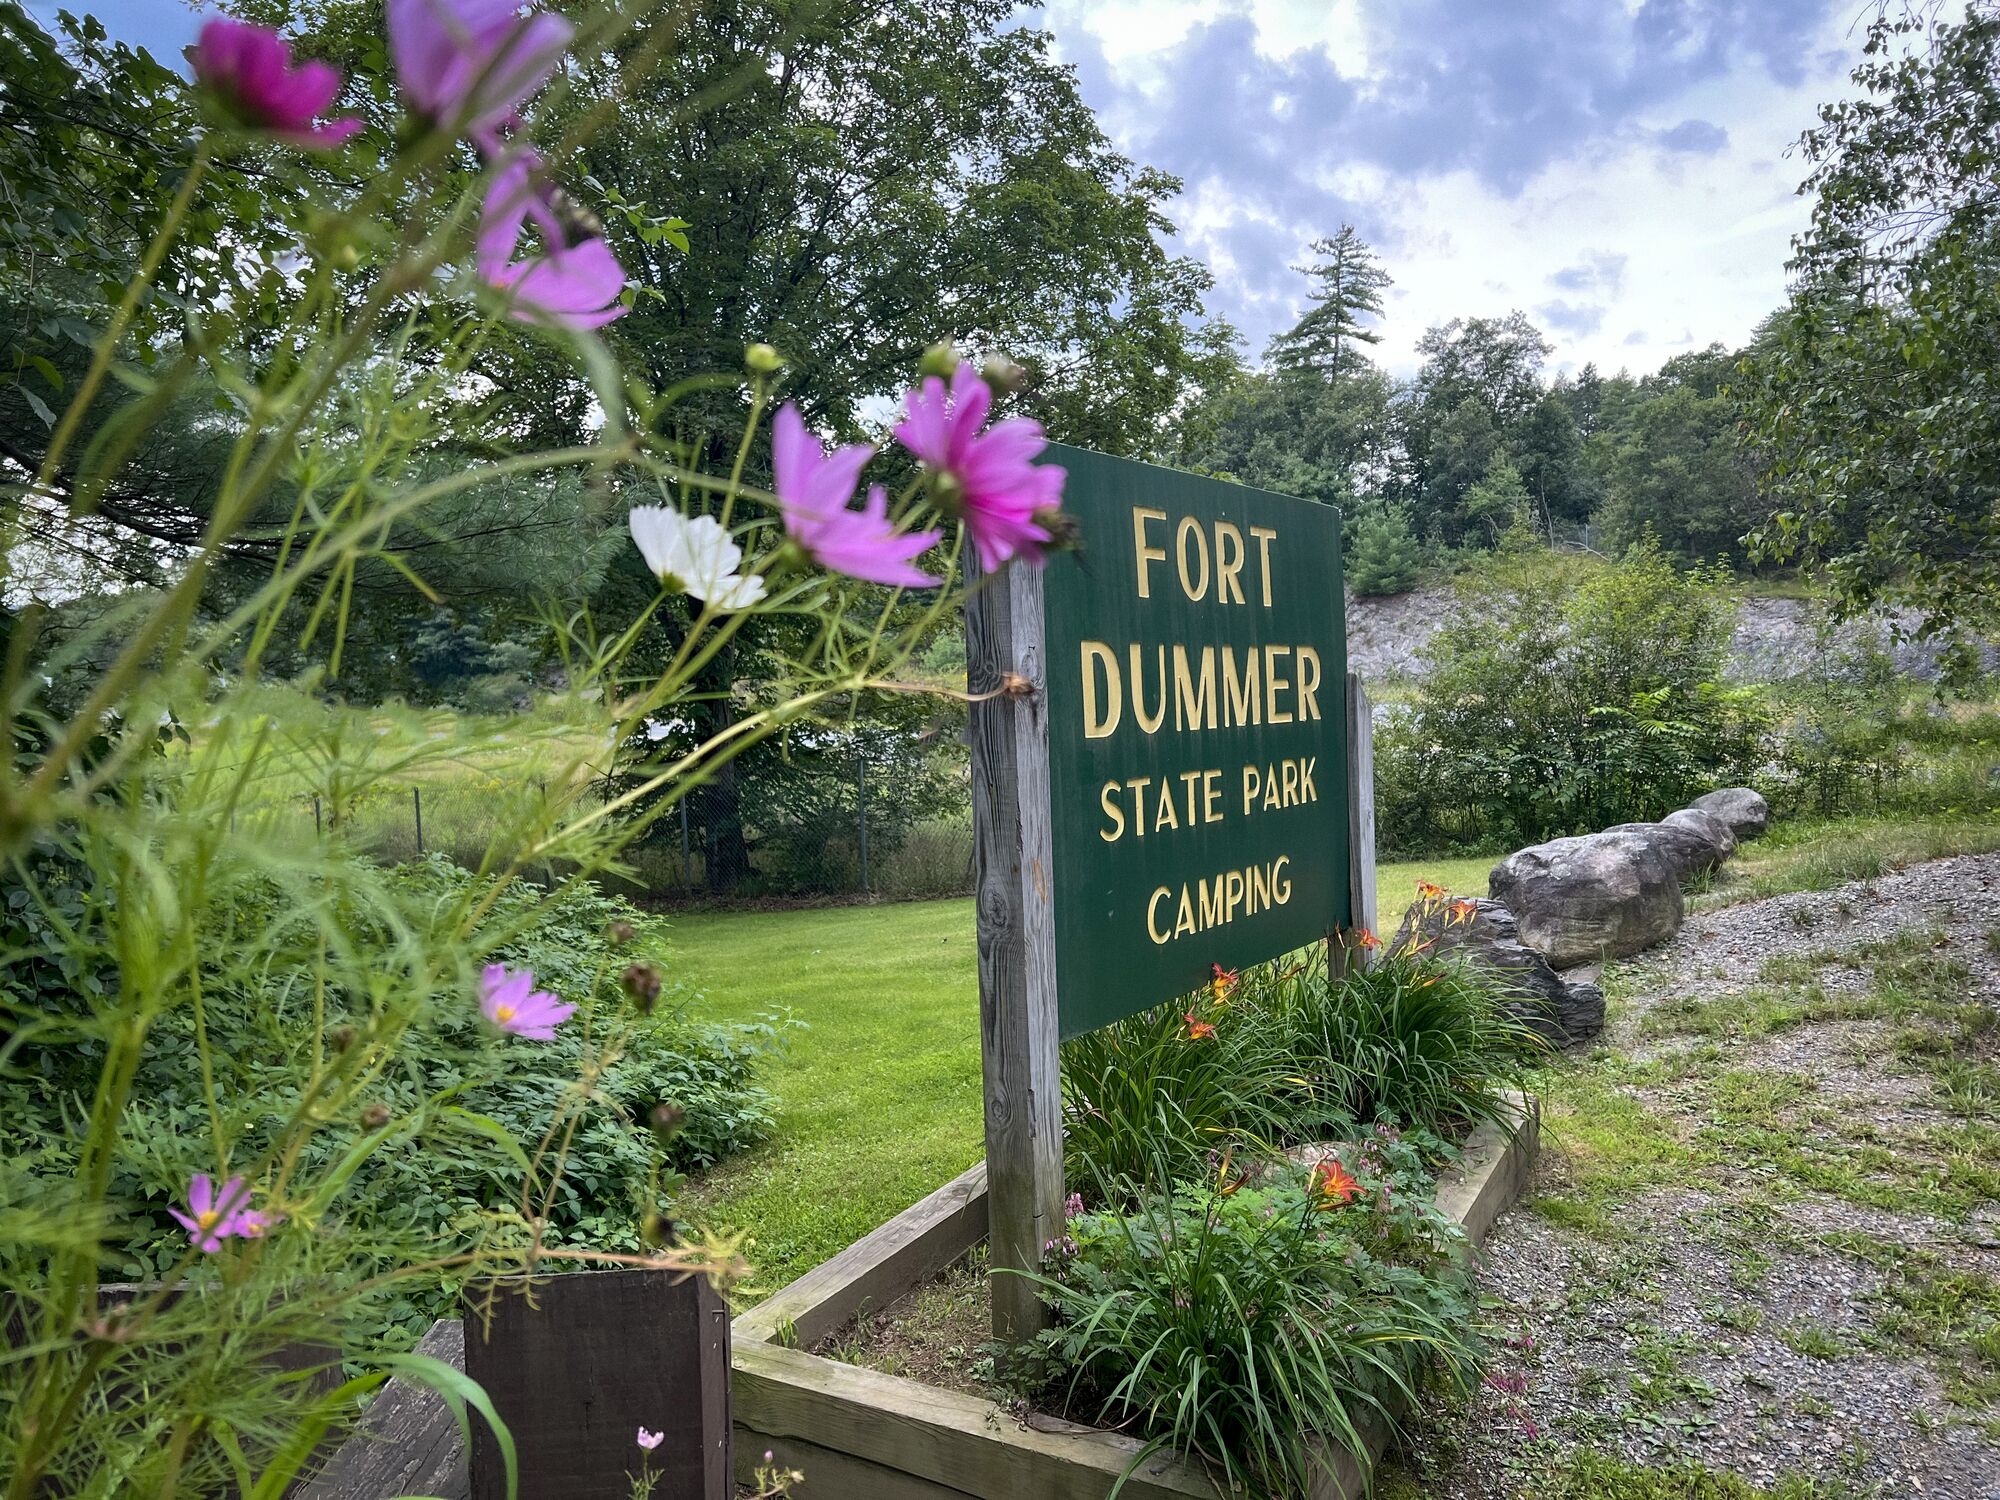 A sign reading “Fort Dummer State Park Camping” outside with flowers blooming in the summer.